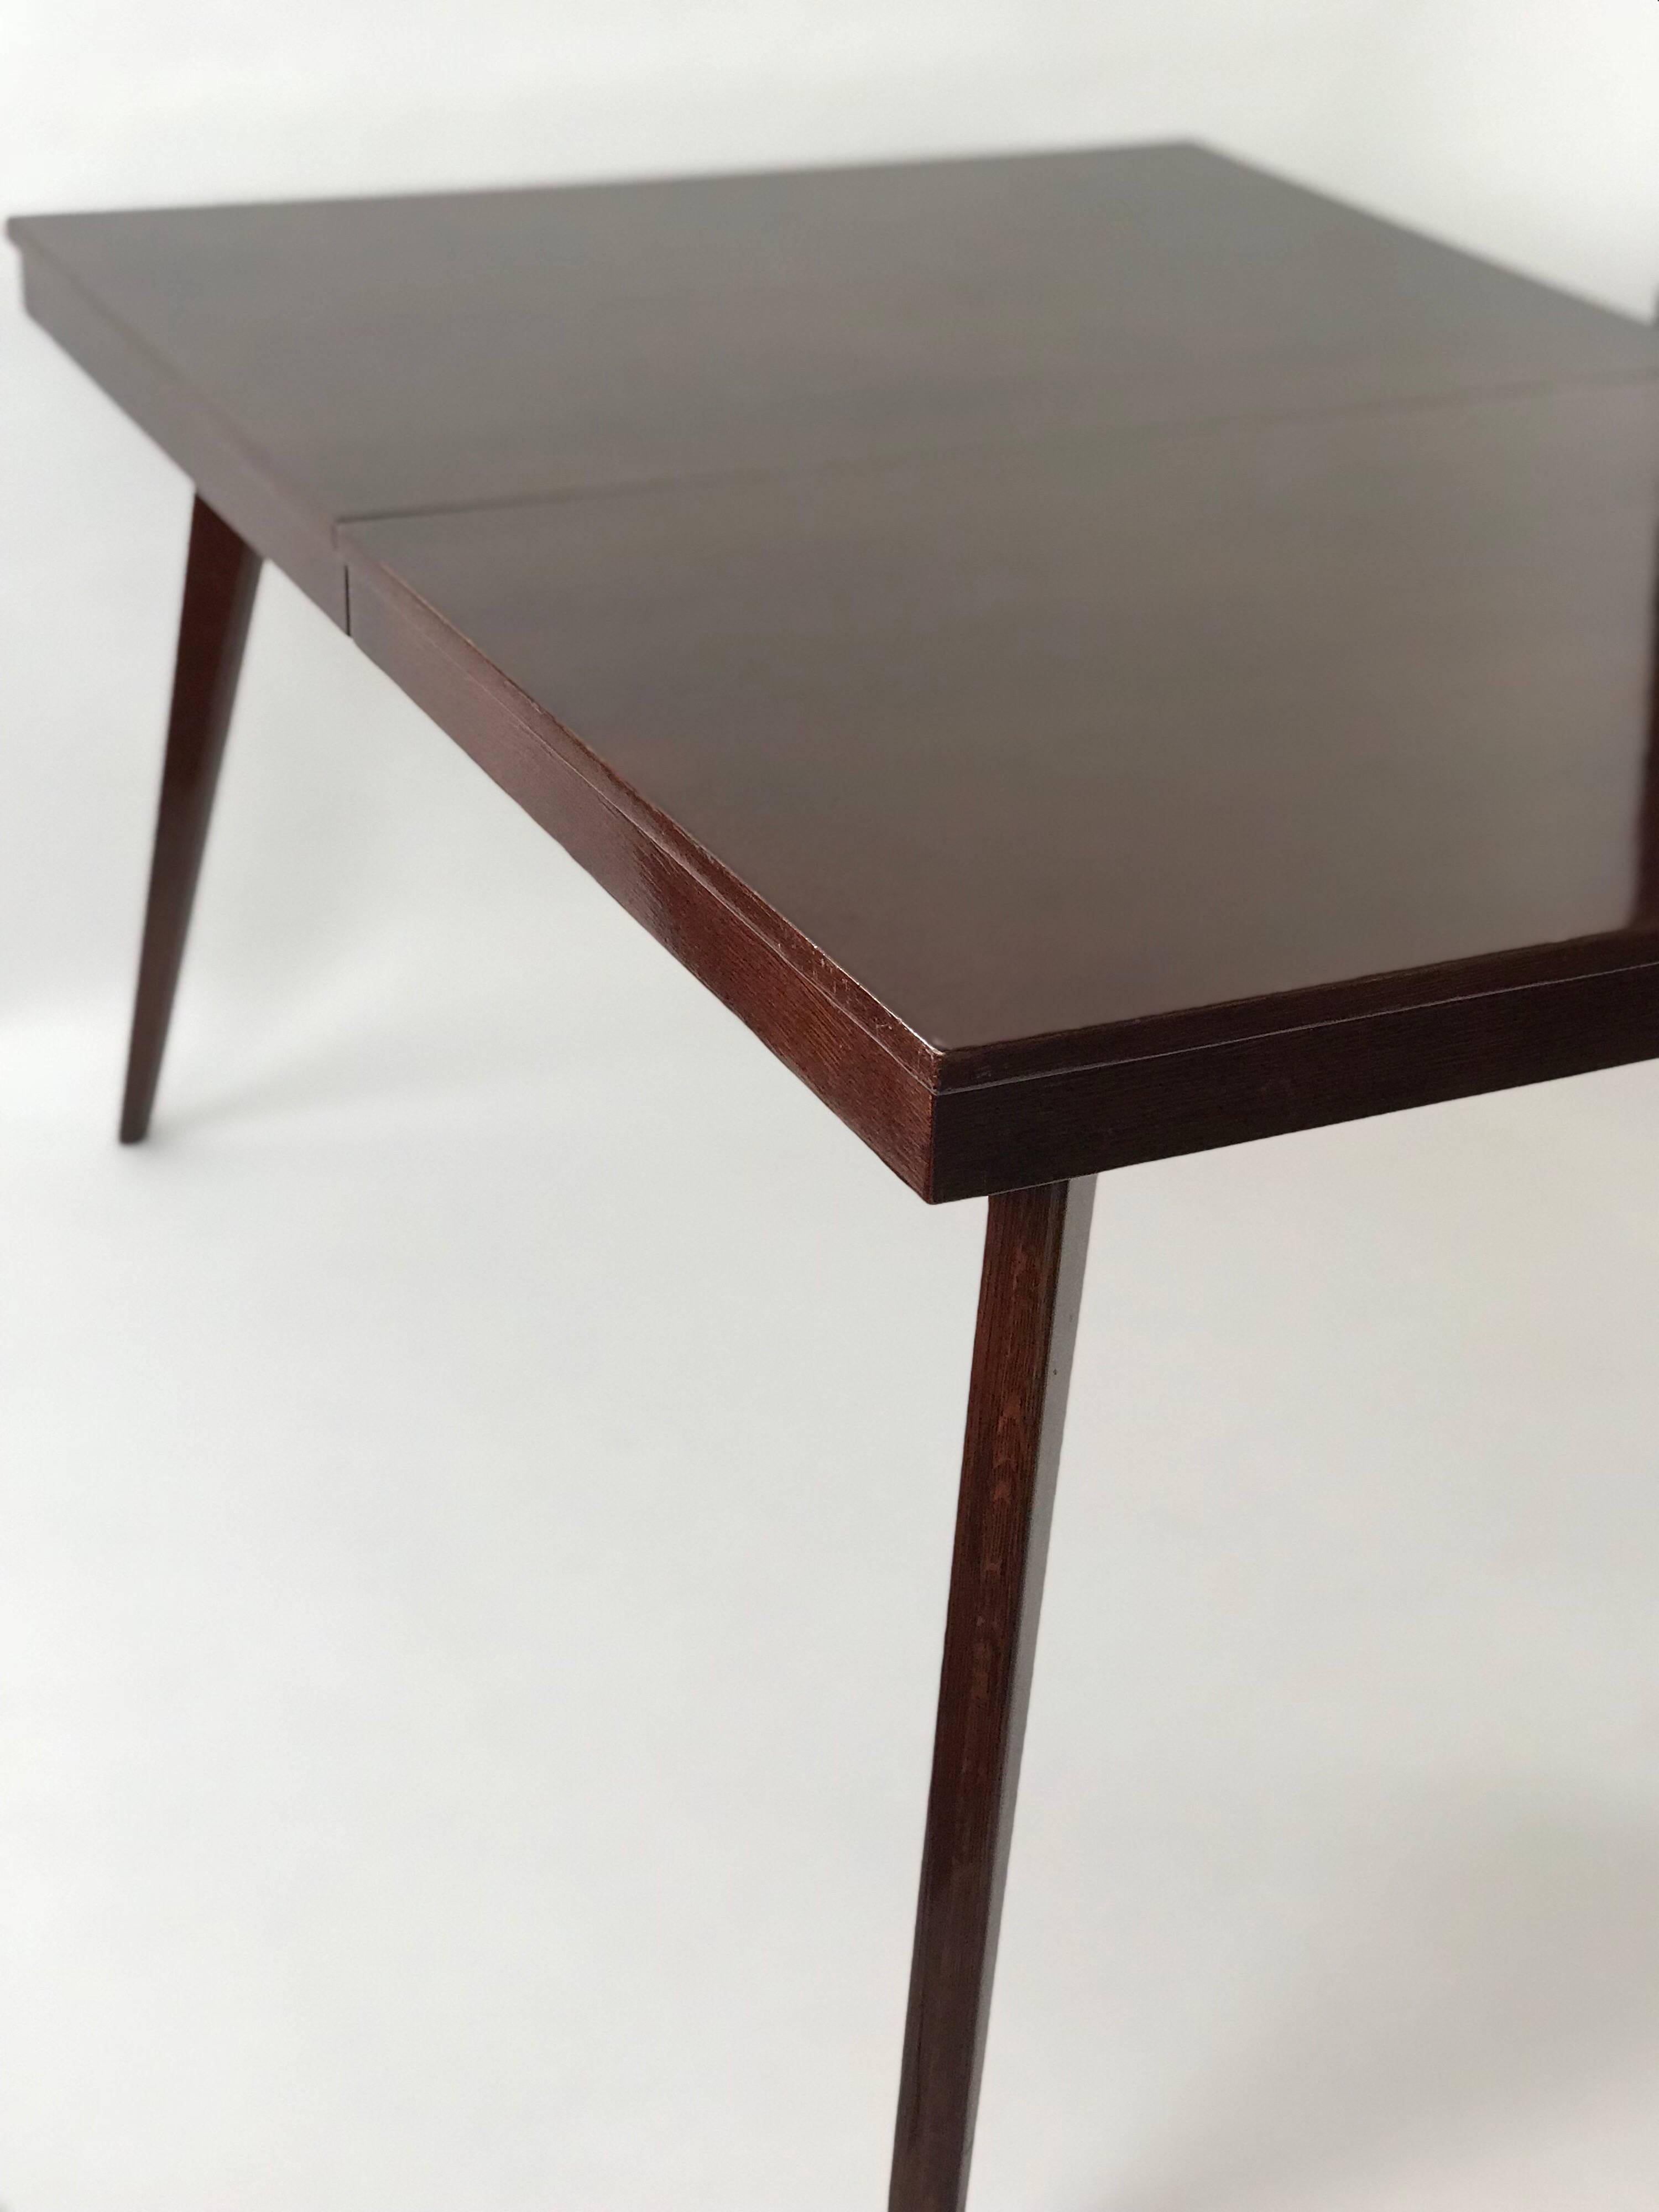 This is a beautiful Classic midcentury dining table in a polished mahogany by Gilbert Rohde for Herman Miller. Includes a black polished insert. Some scratches and one corner is dented. 

Dimensions with leaf: 72